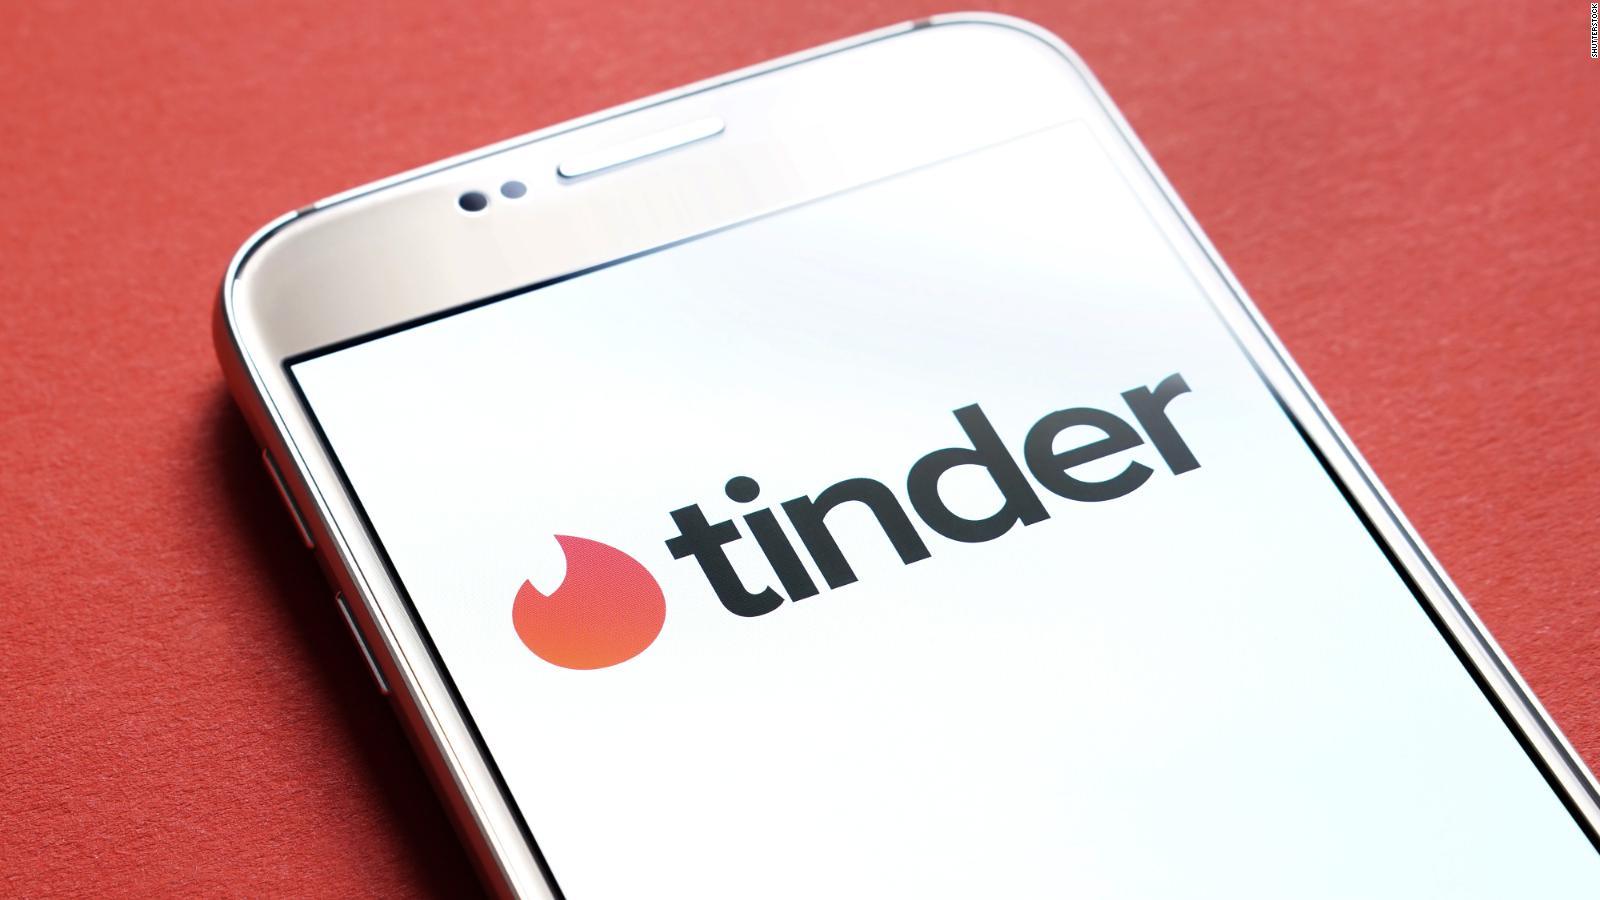 Dating On Tinder App: Read Various Facts And Tips How To Use Tinder Secretly